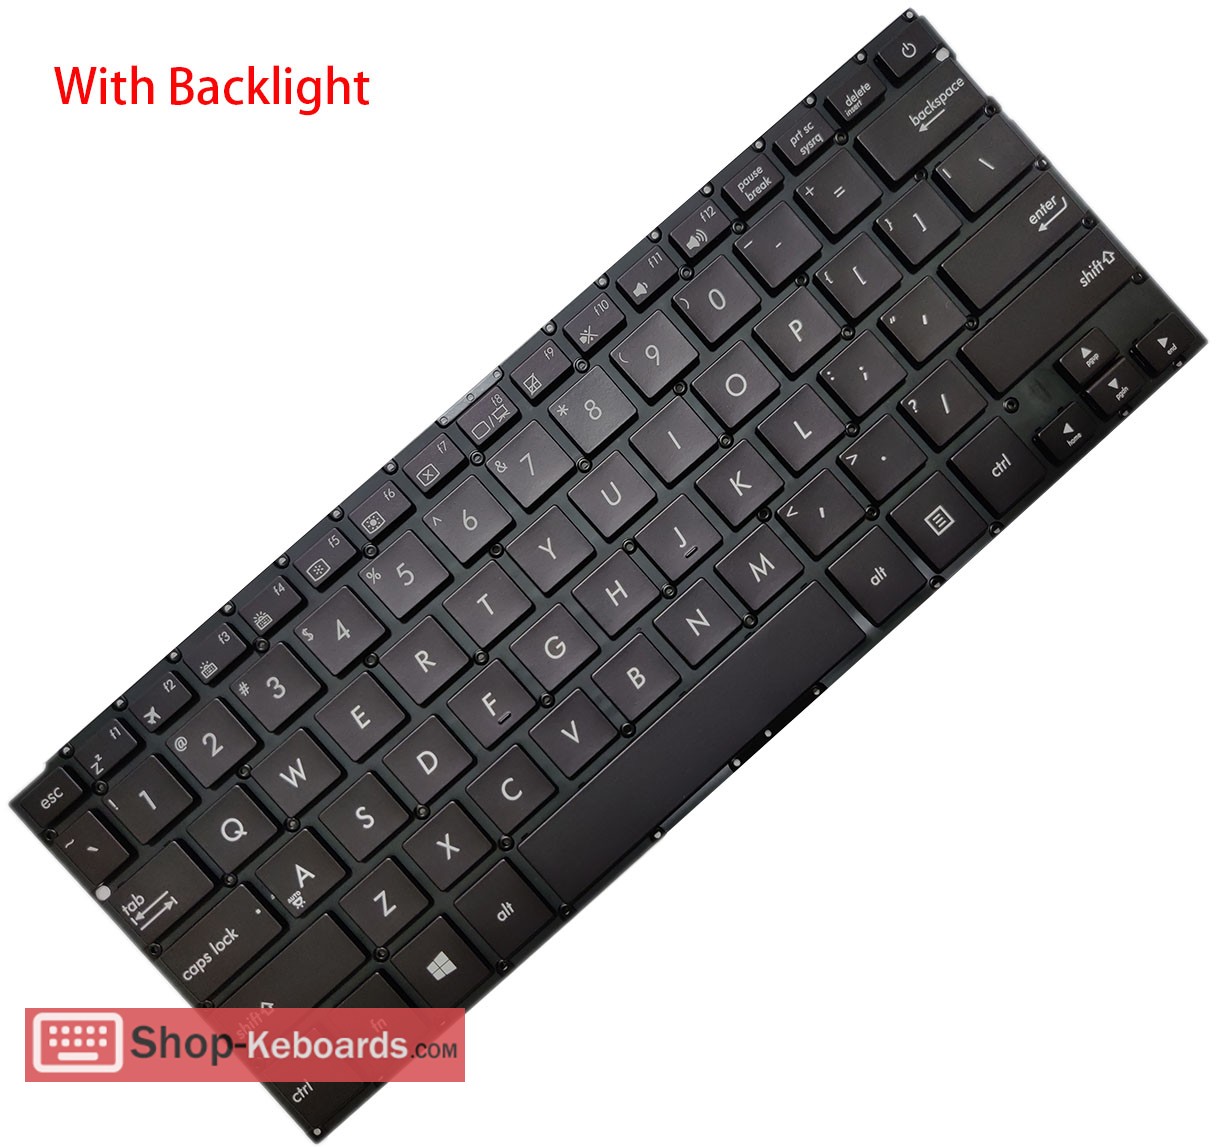 Asus 0KNB0-2624US00 Keyboard replacement